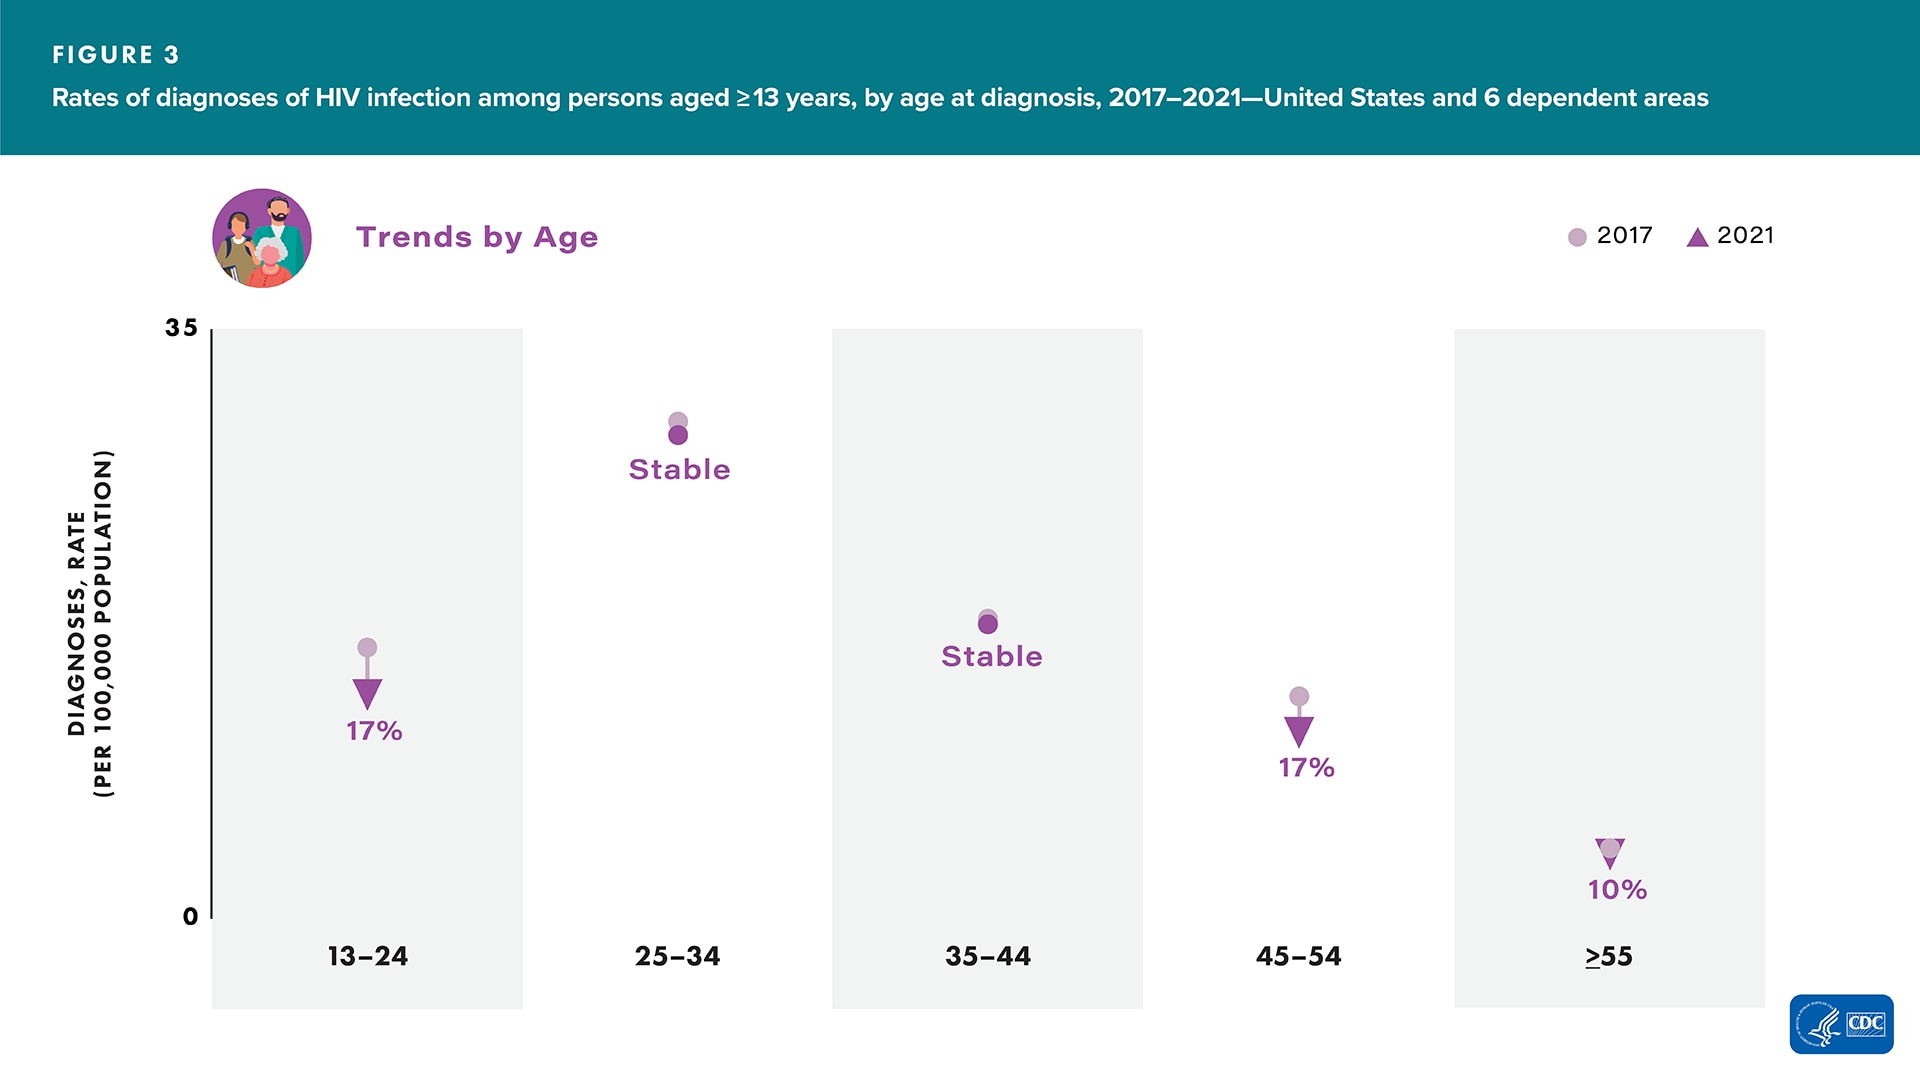 In 2021, compared to 2017, in the United States and 6 dependent areas, the rates among persons aged 13–24, 45–54, and ≥55 years decreased. The rates among persons aged 25–34 and 35-44 years remained stable.